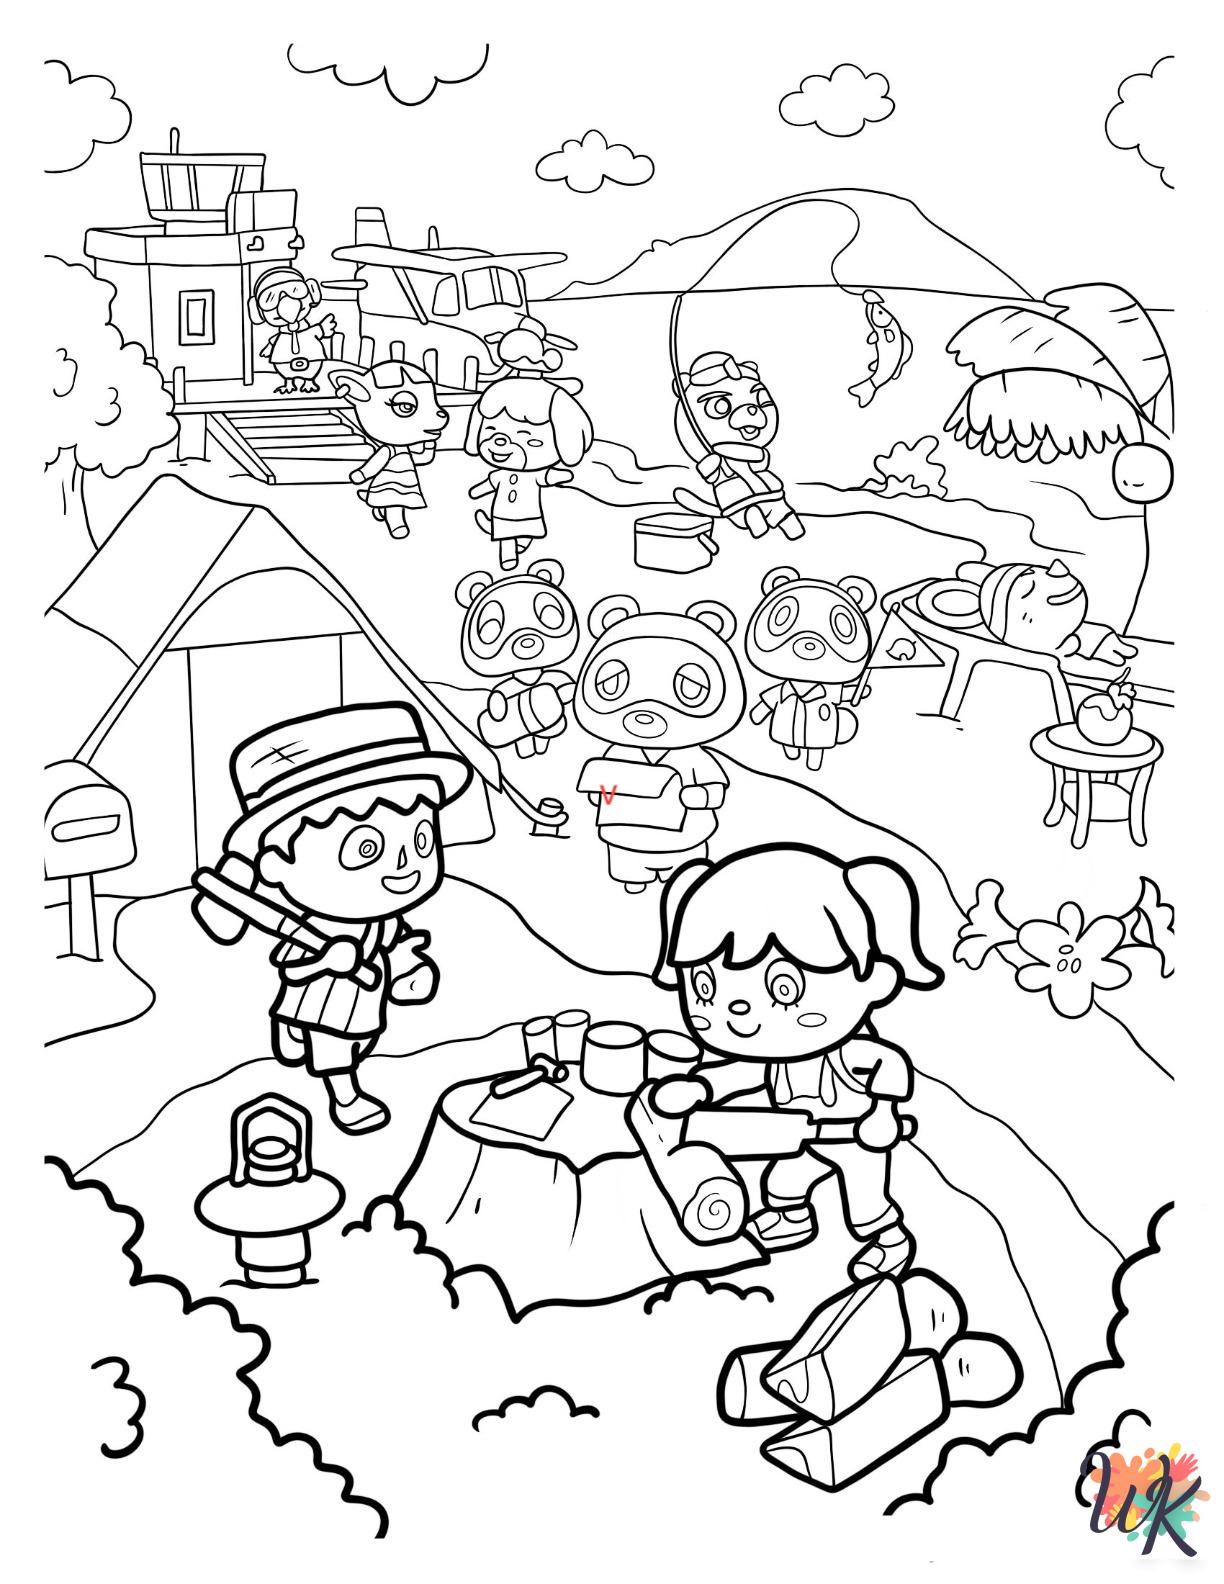 coloring pages for kids Animal Crossing